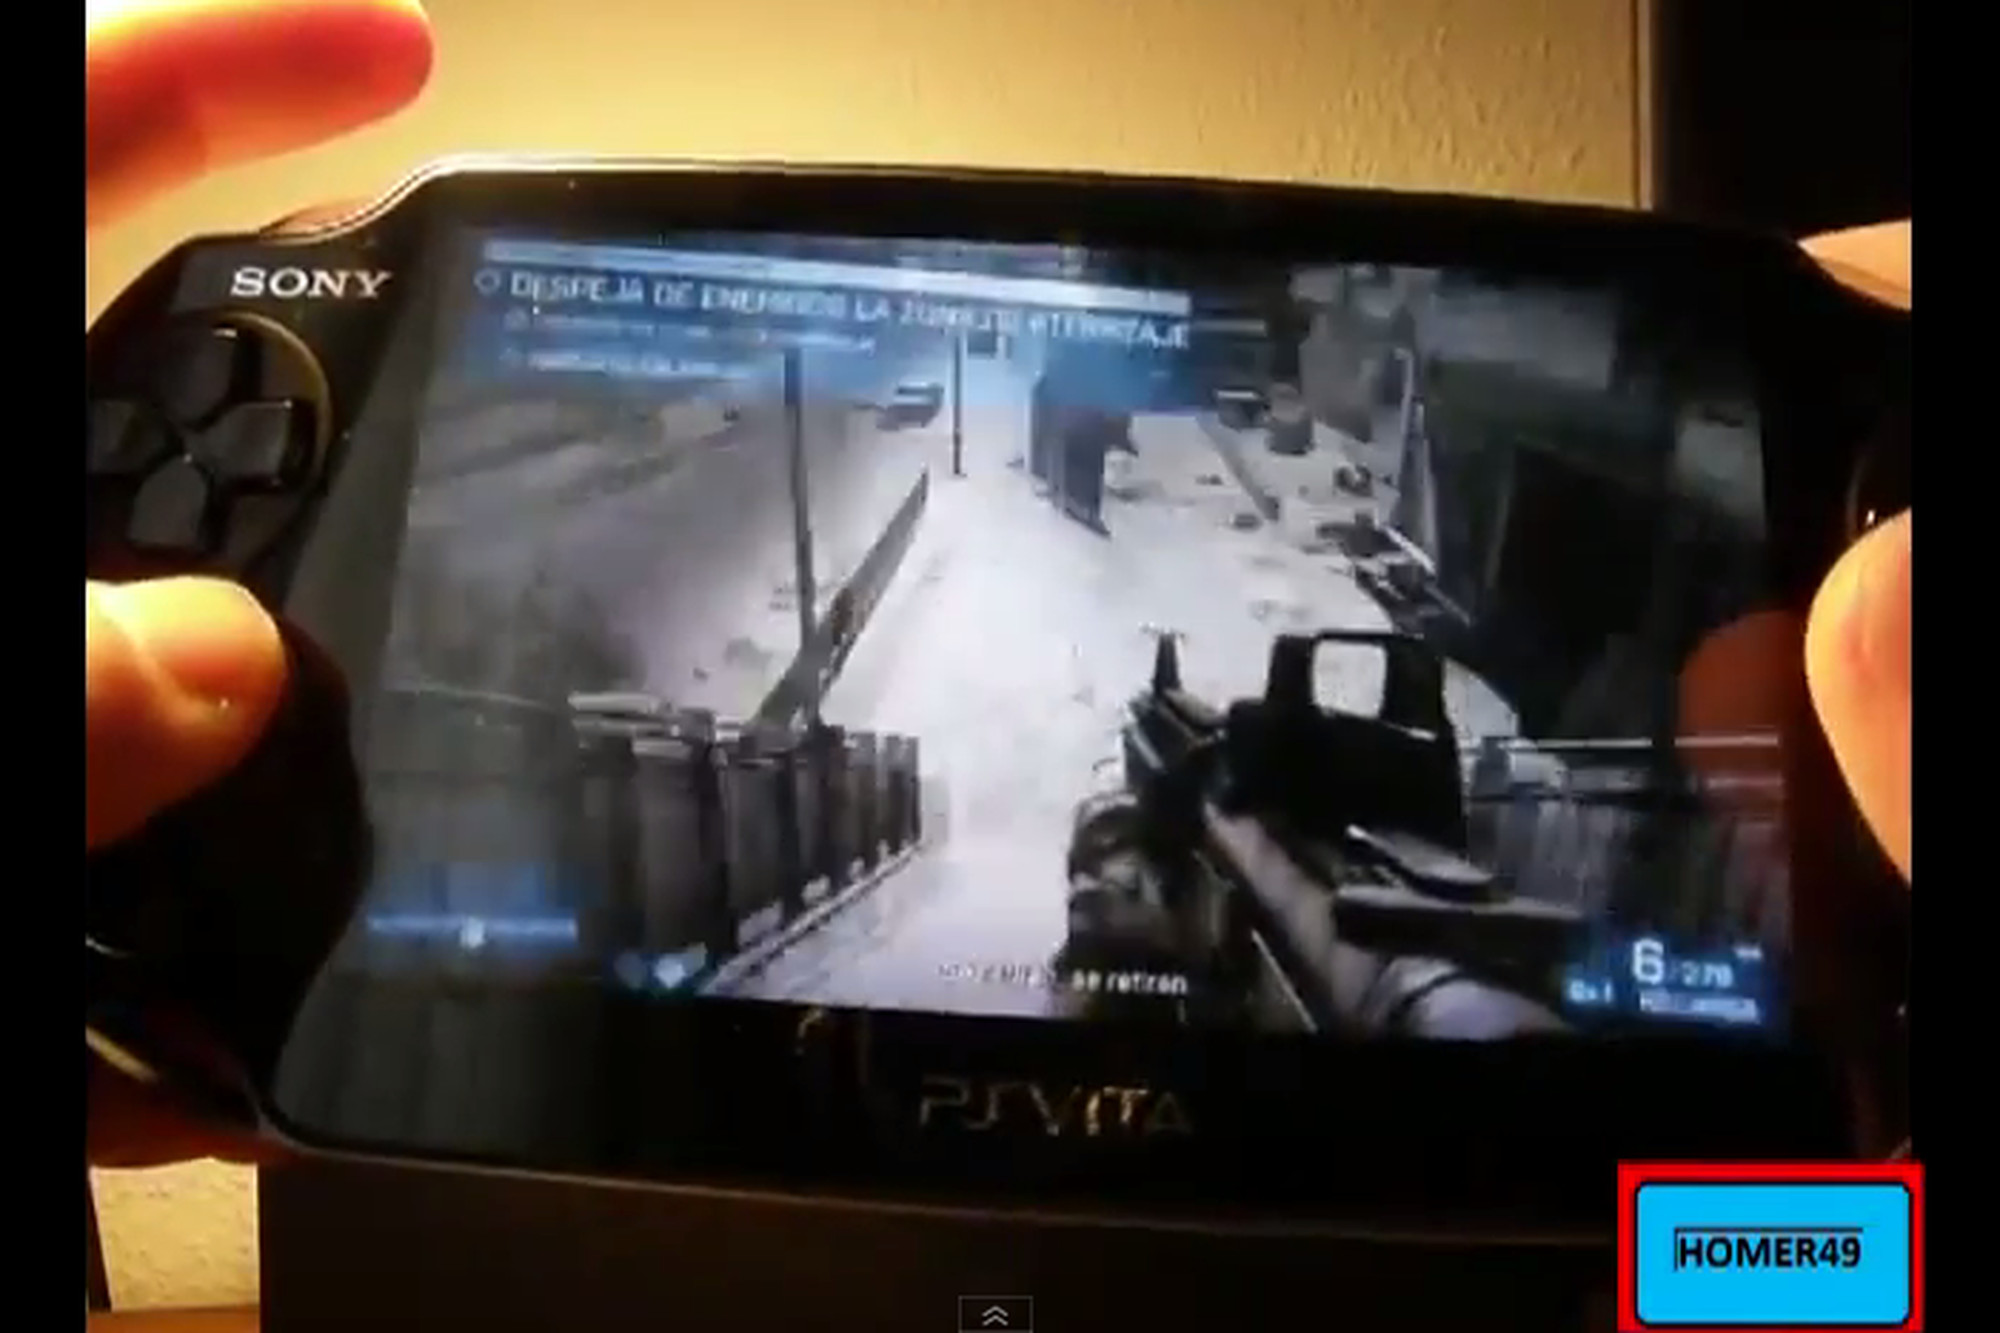 getrouwd haag Talloos PS3 games streaming to PS Vita via hacked Remote Play software - The Verge